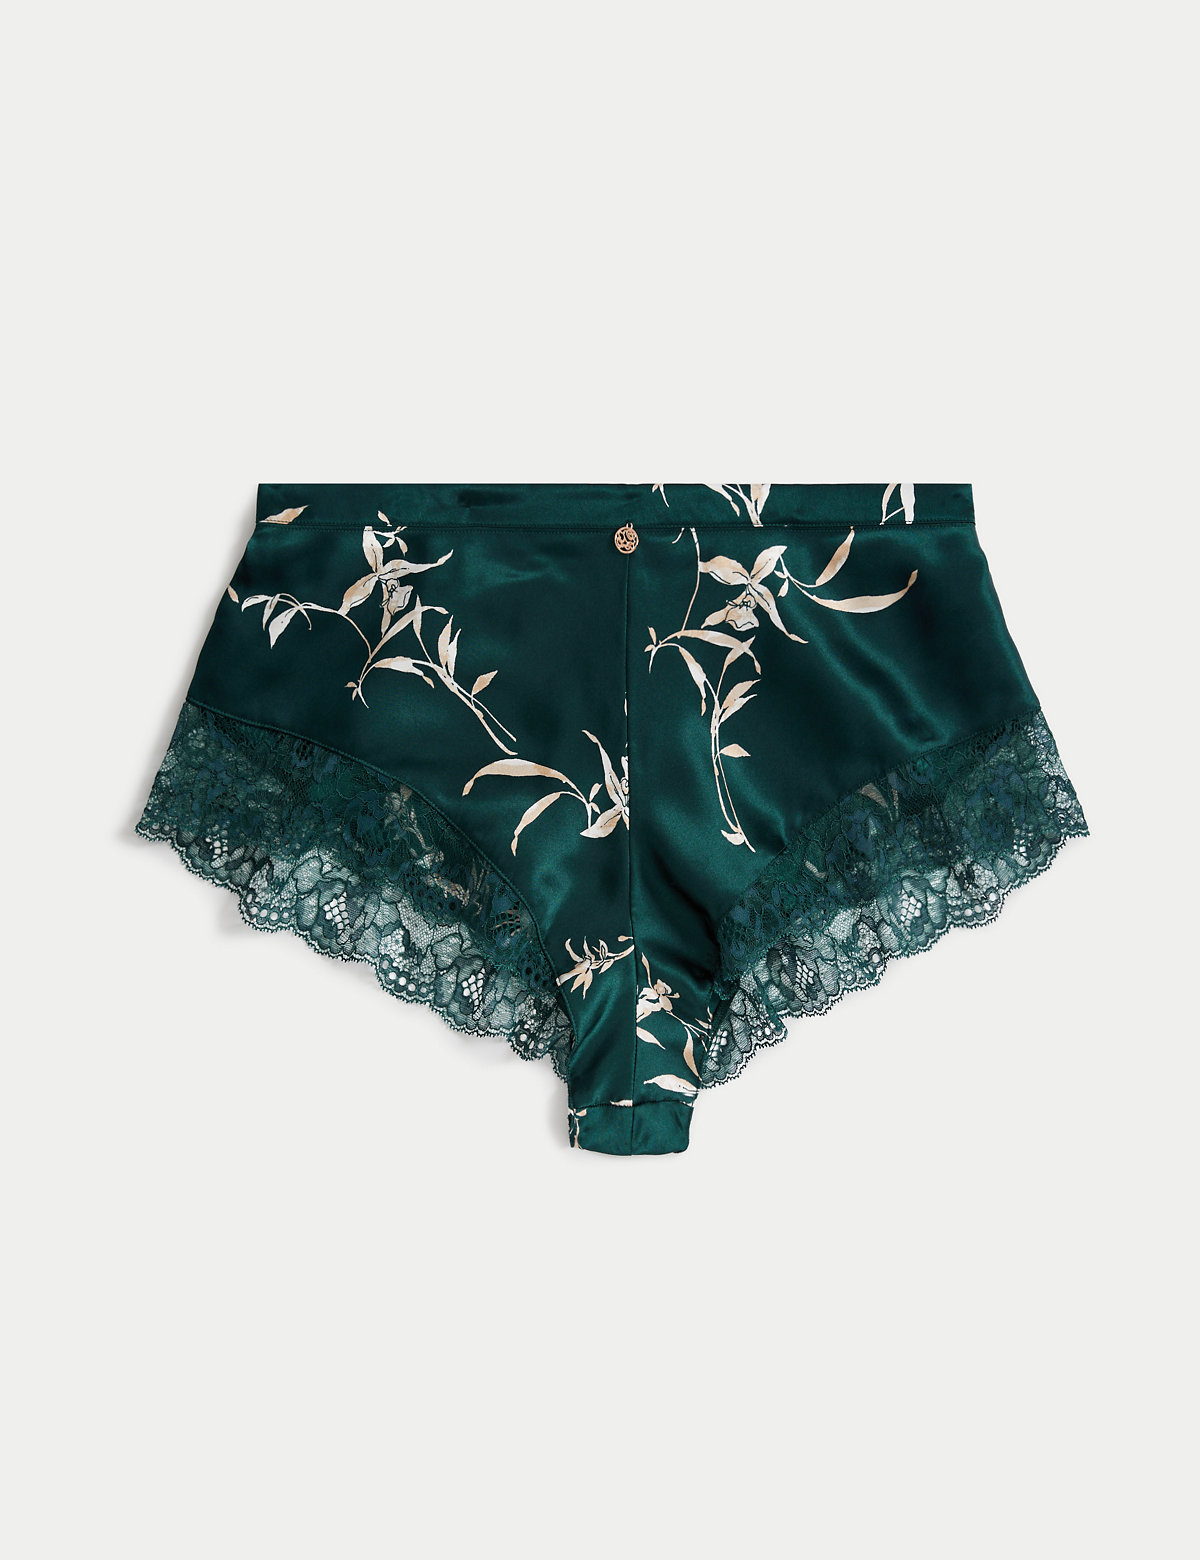 Cassia Silk & Lace French Knickers